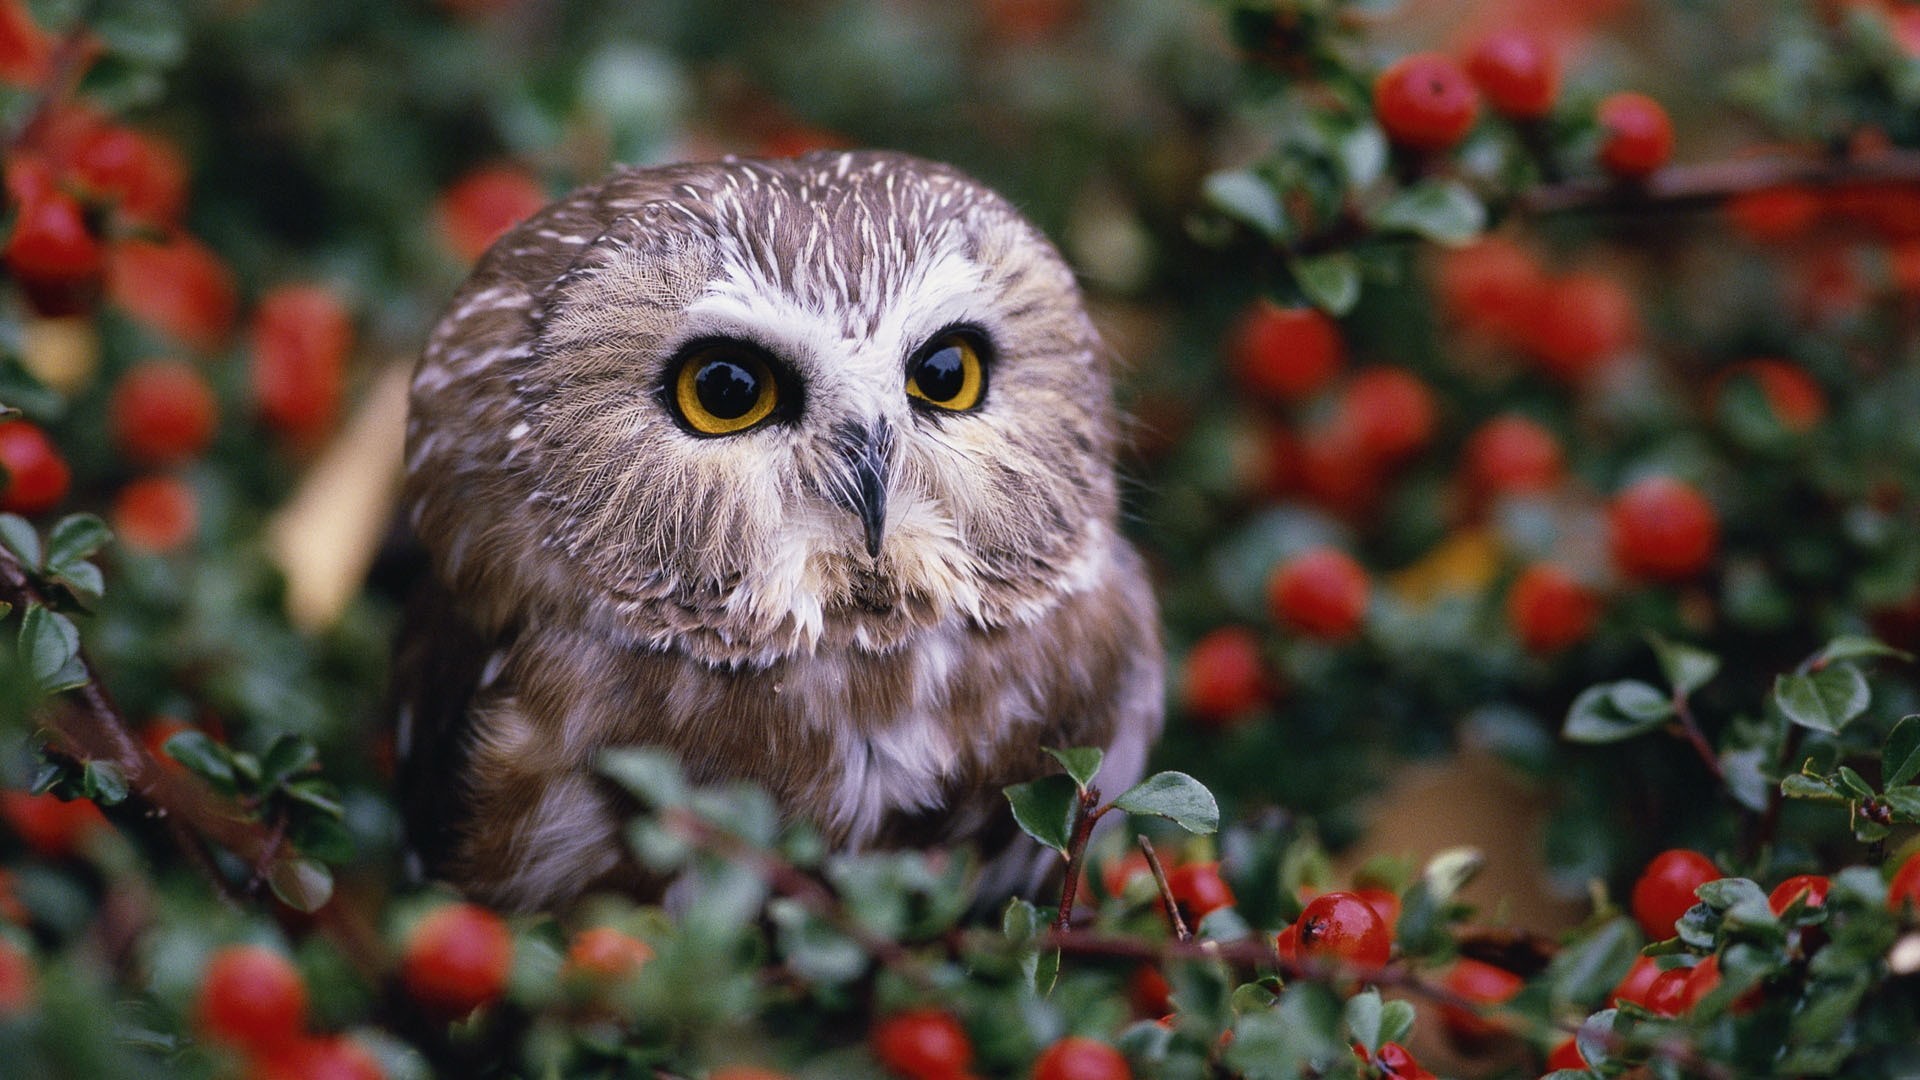 General 1920x1080 nature animals baby animals owl depth of field leaves birds